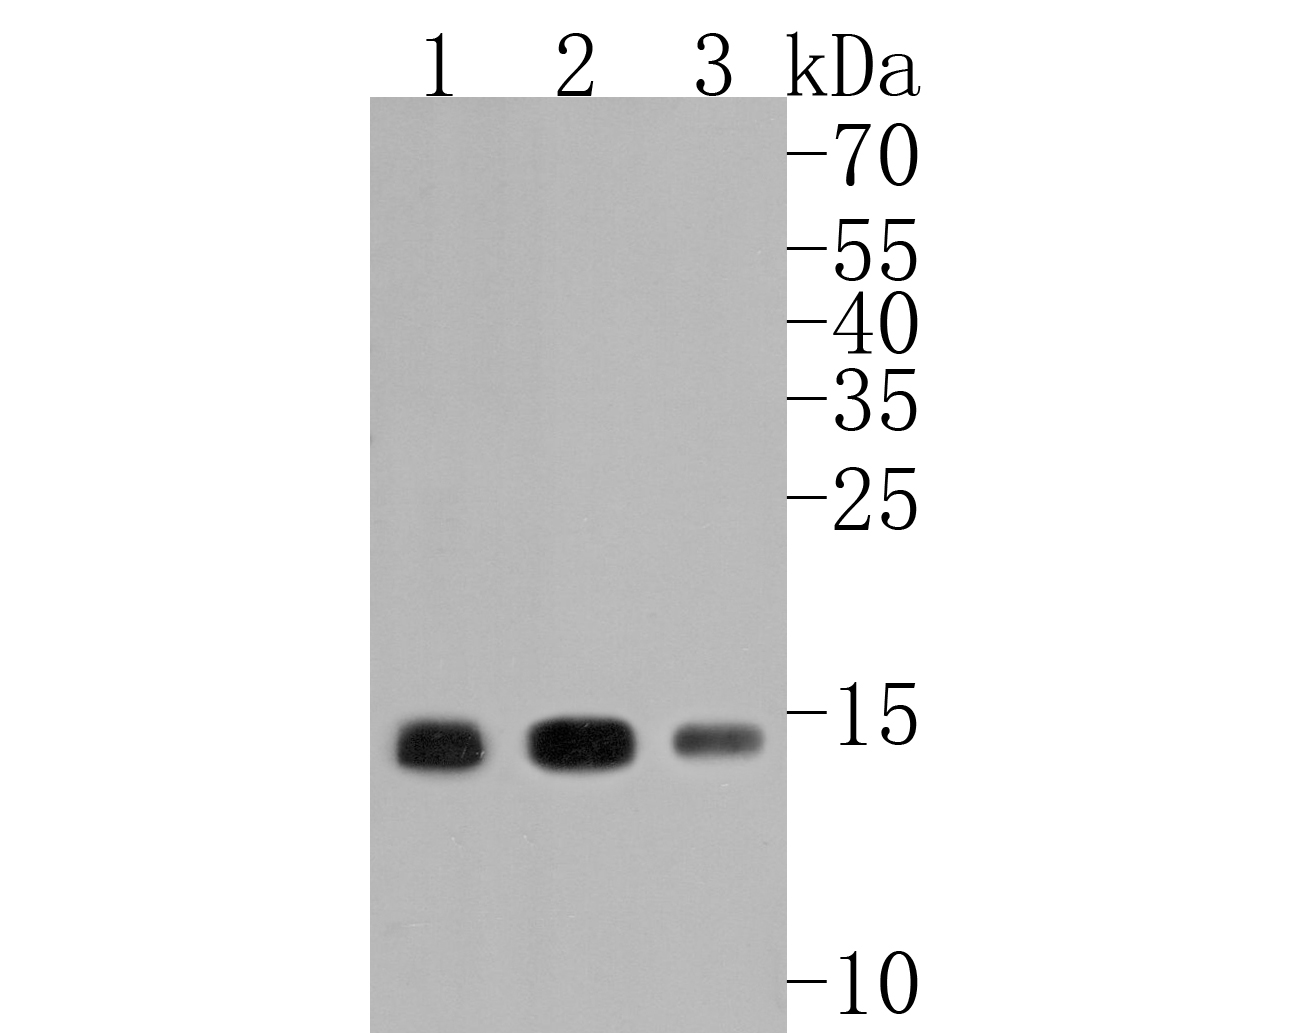 Western blot analysis of Histone H3 (acetyl K14) on different lysates. Proteins were transferred to a PVDF membrane and blocked with 5% BSA in PBS for 1 hour at room temperature. The primary antibody (ET1706-28, 1/500) was used in 5% BSA at room temperature for 2 hours. Goat Anti-Rabbit IgG - HRP Secondary Antibody (HA1001) at 1:200,000 dilution was used for 1 hour at room temperature.<br />
Positive control: <br />
Lane 1: Jurkat cell lysate<br />
Lane 2: Rat liver tissue lysate<br />
Lane 3: Mouse lung tissue lysate